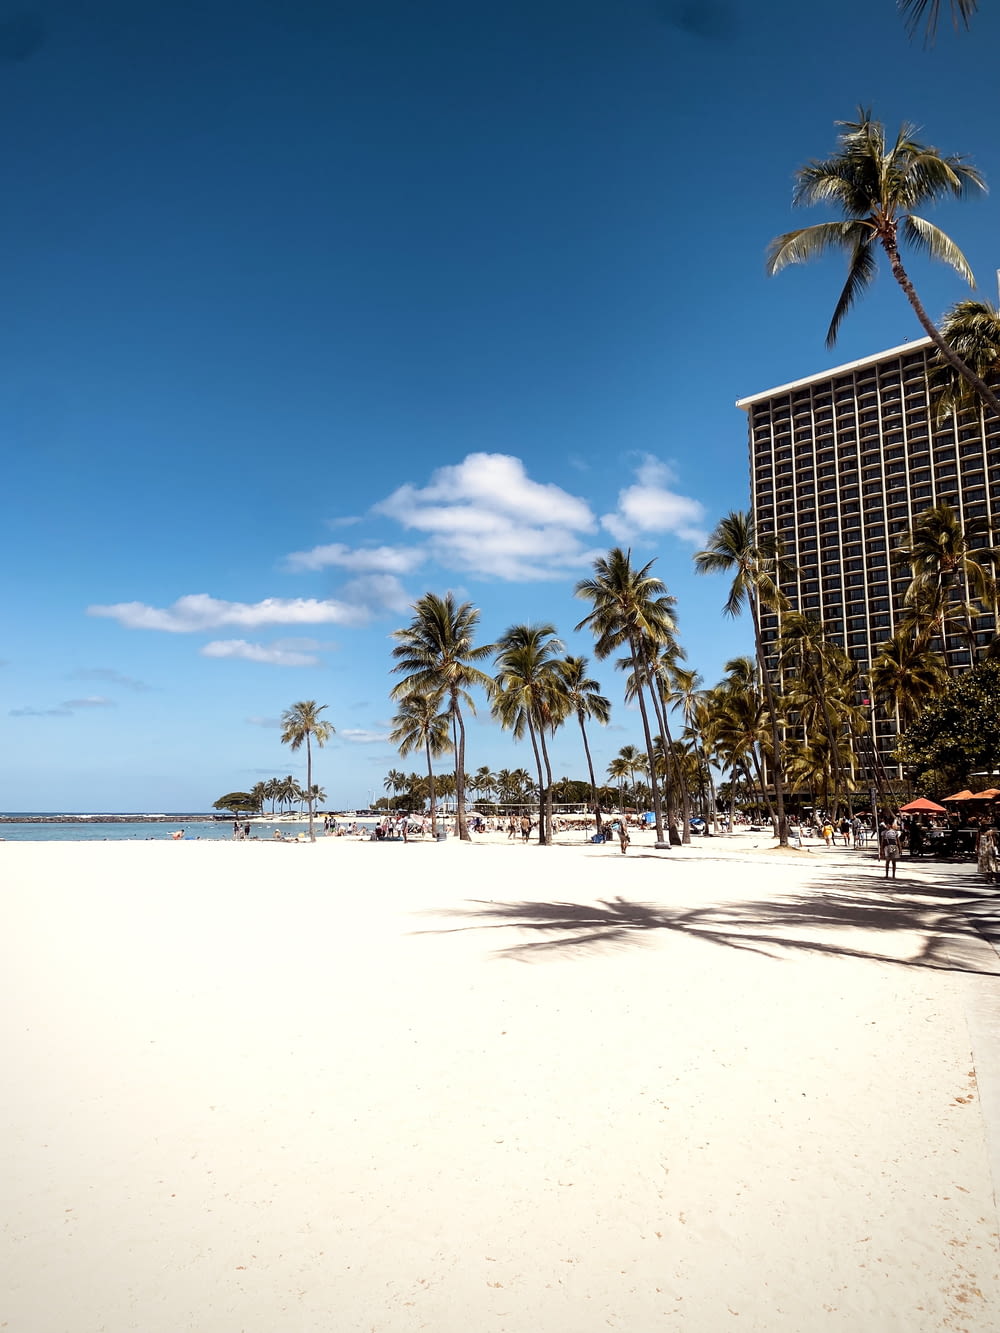 a beach with palm trees and a hotel in the background